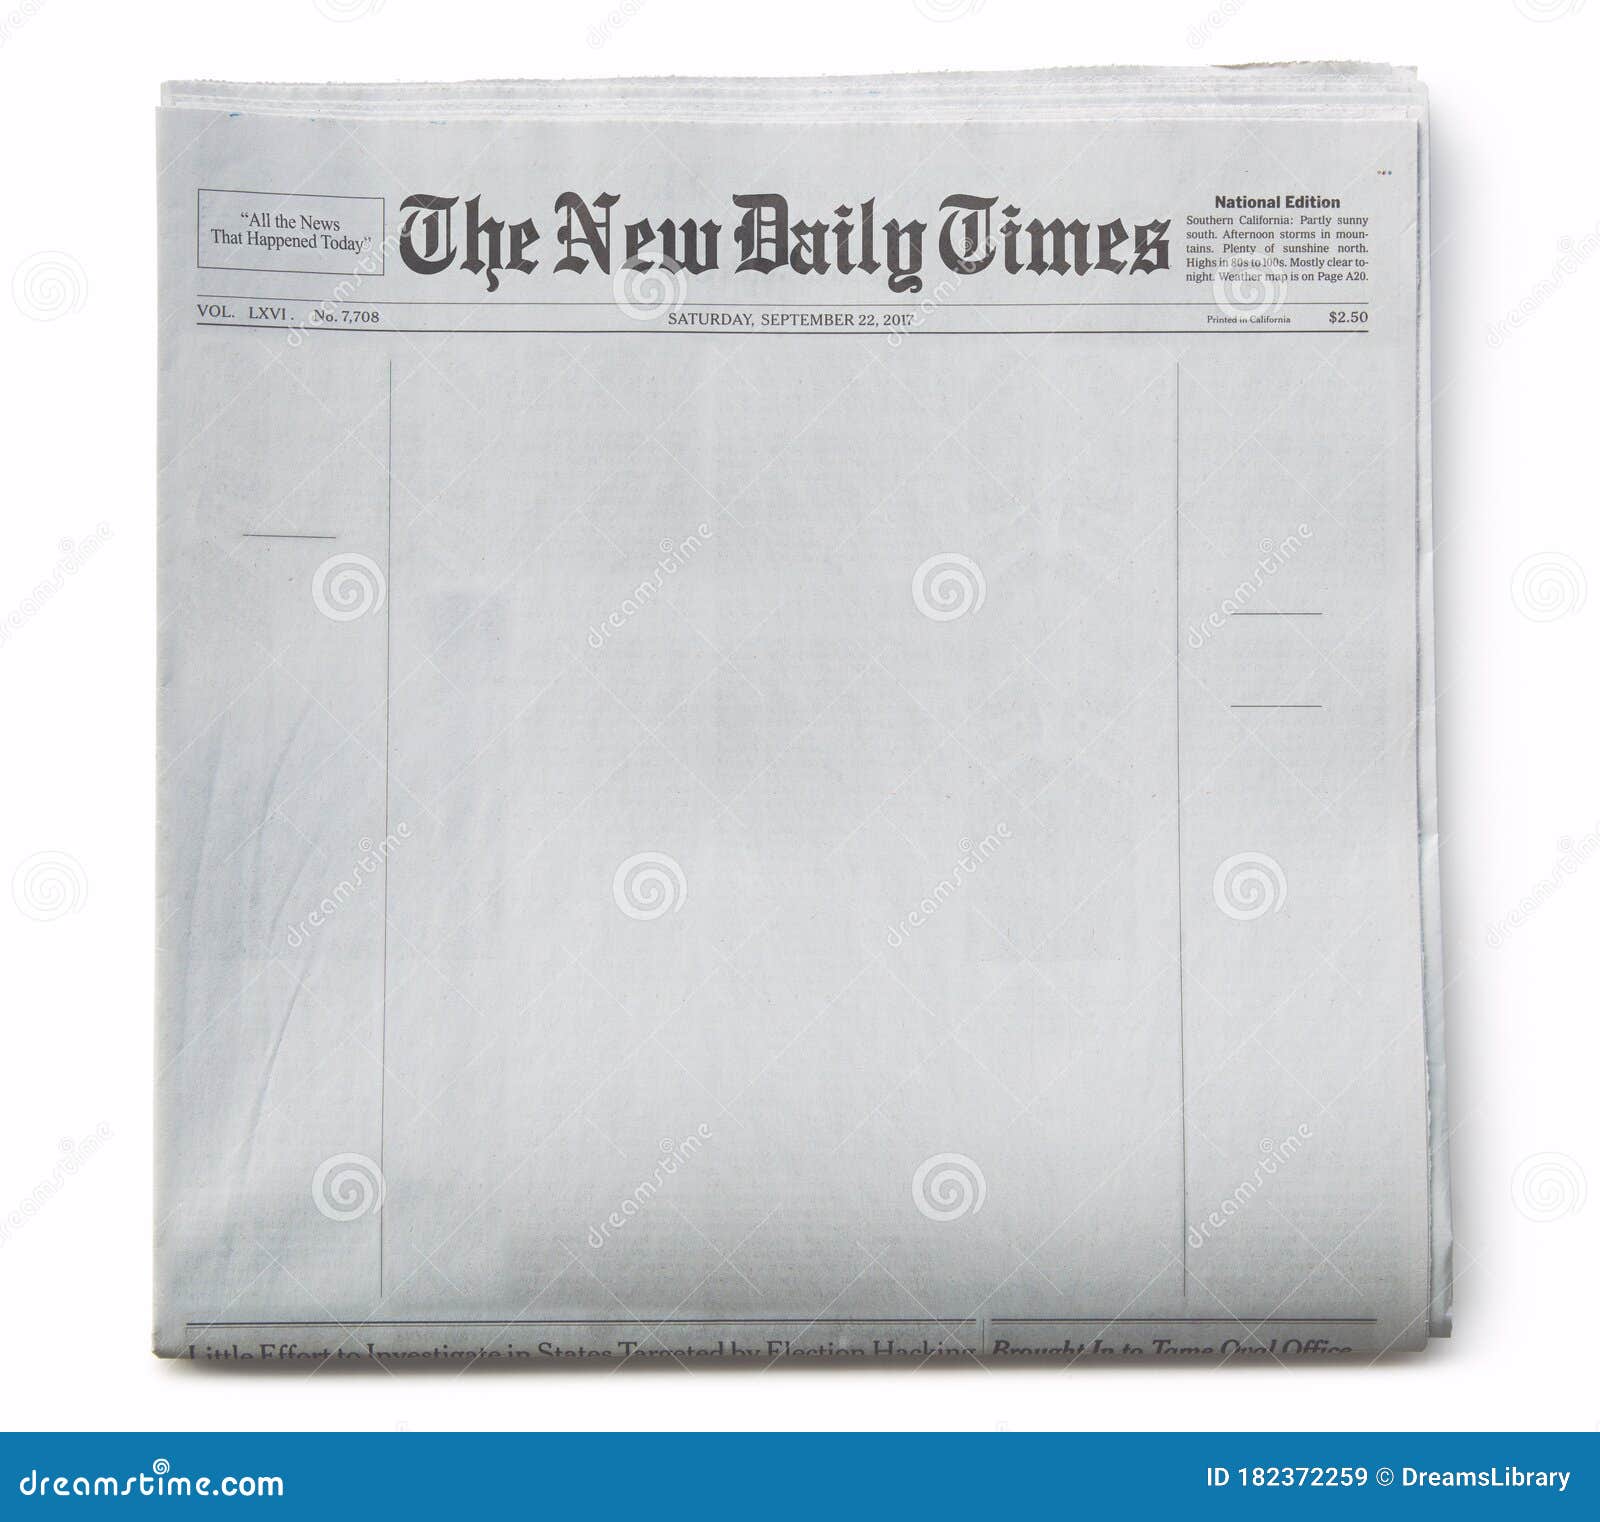 Download 1 300 Blank Newspaper Template Photos Free Royalty Free Stock Photos From Dreamstime